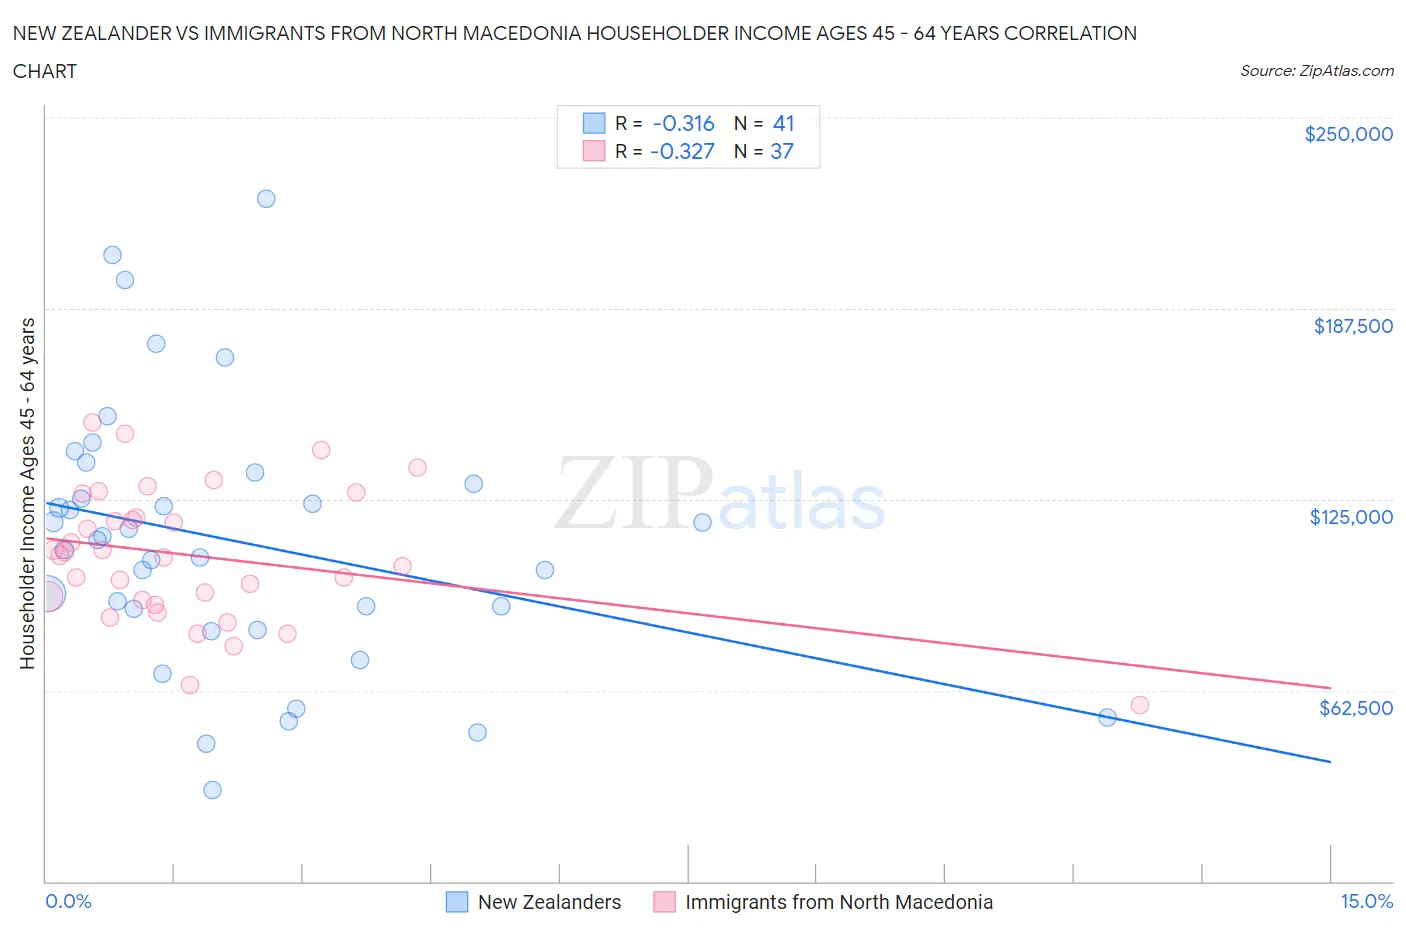 New Zealander vs Immigrants from North Macedonia Householder Income Ages 45 - 64 years